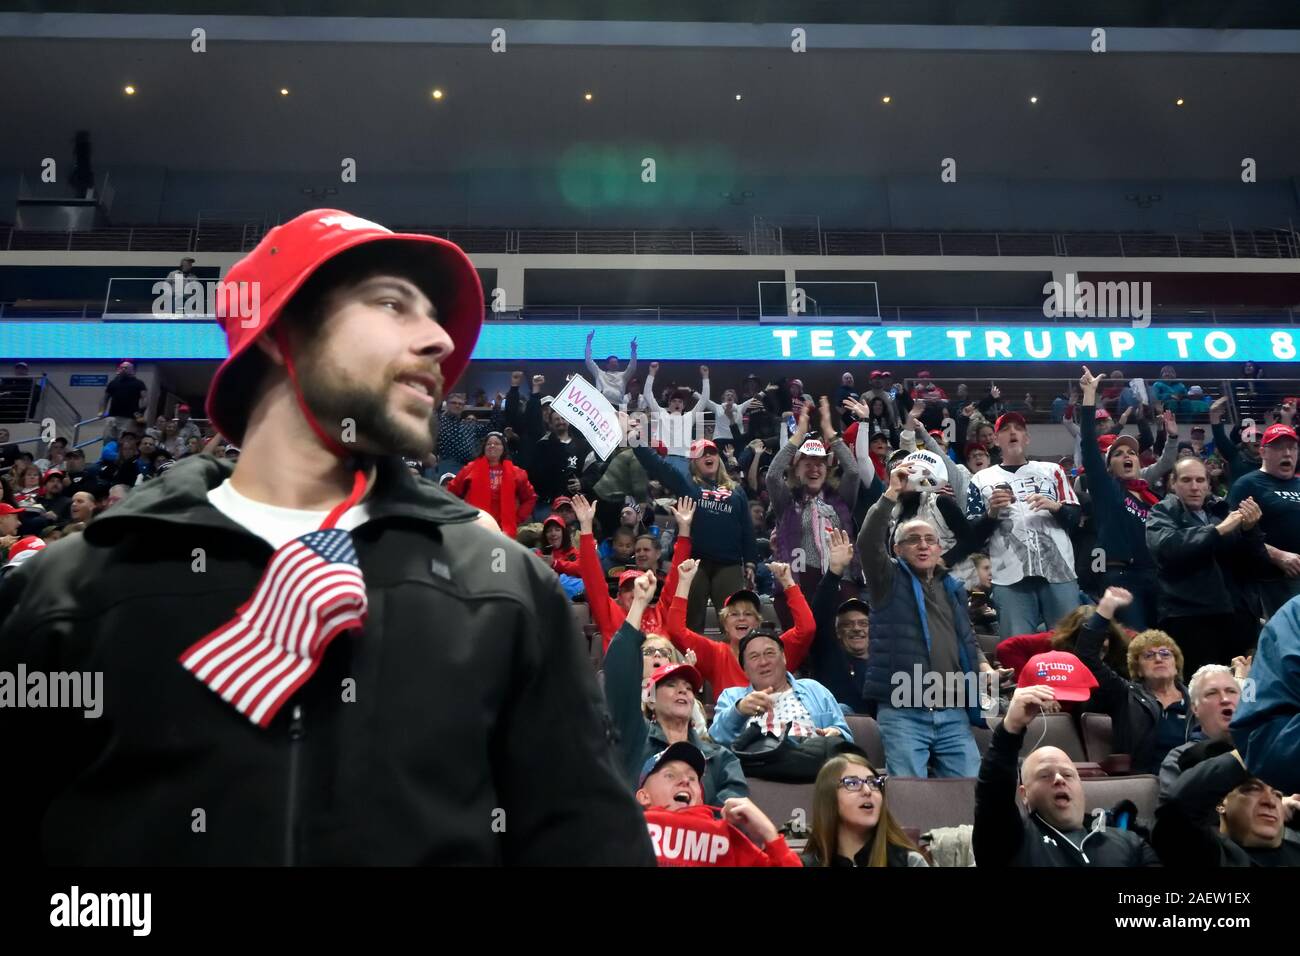 Hershey, Pennsylvania, USA. 10th December, 2019. The arena fills with supporters ahead of a rally with U.S. President Donald Trump and Vice-President Mike Pence as they return to Pennsylvania for a a Keep America Great campaign event at the Giant Center, in Hershey, PA, on December 10, 2019. Credit: OOgImages/Alamy Live News Stock Photo